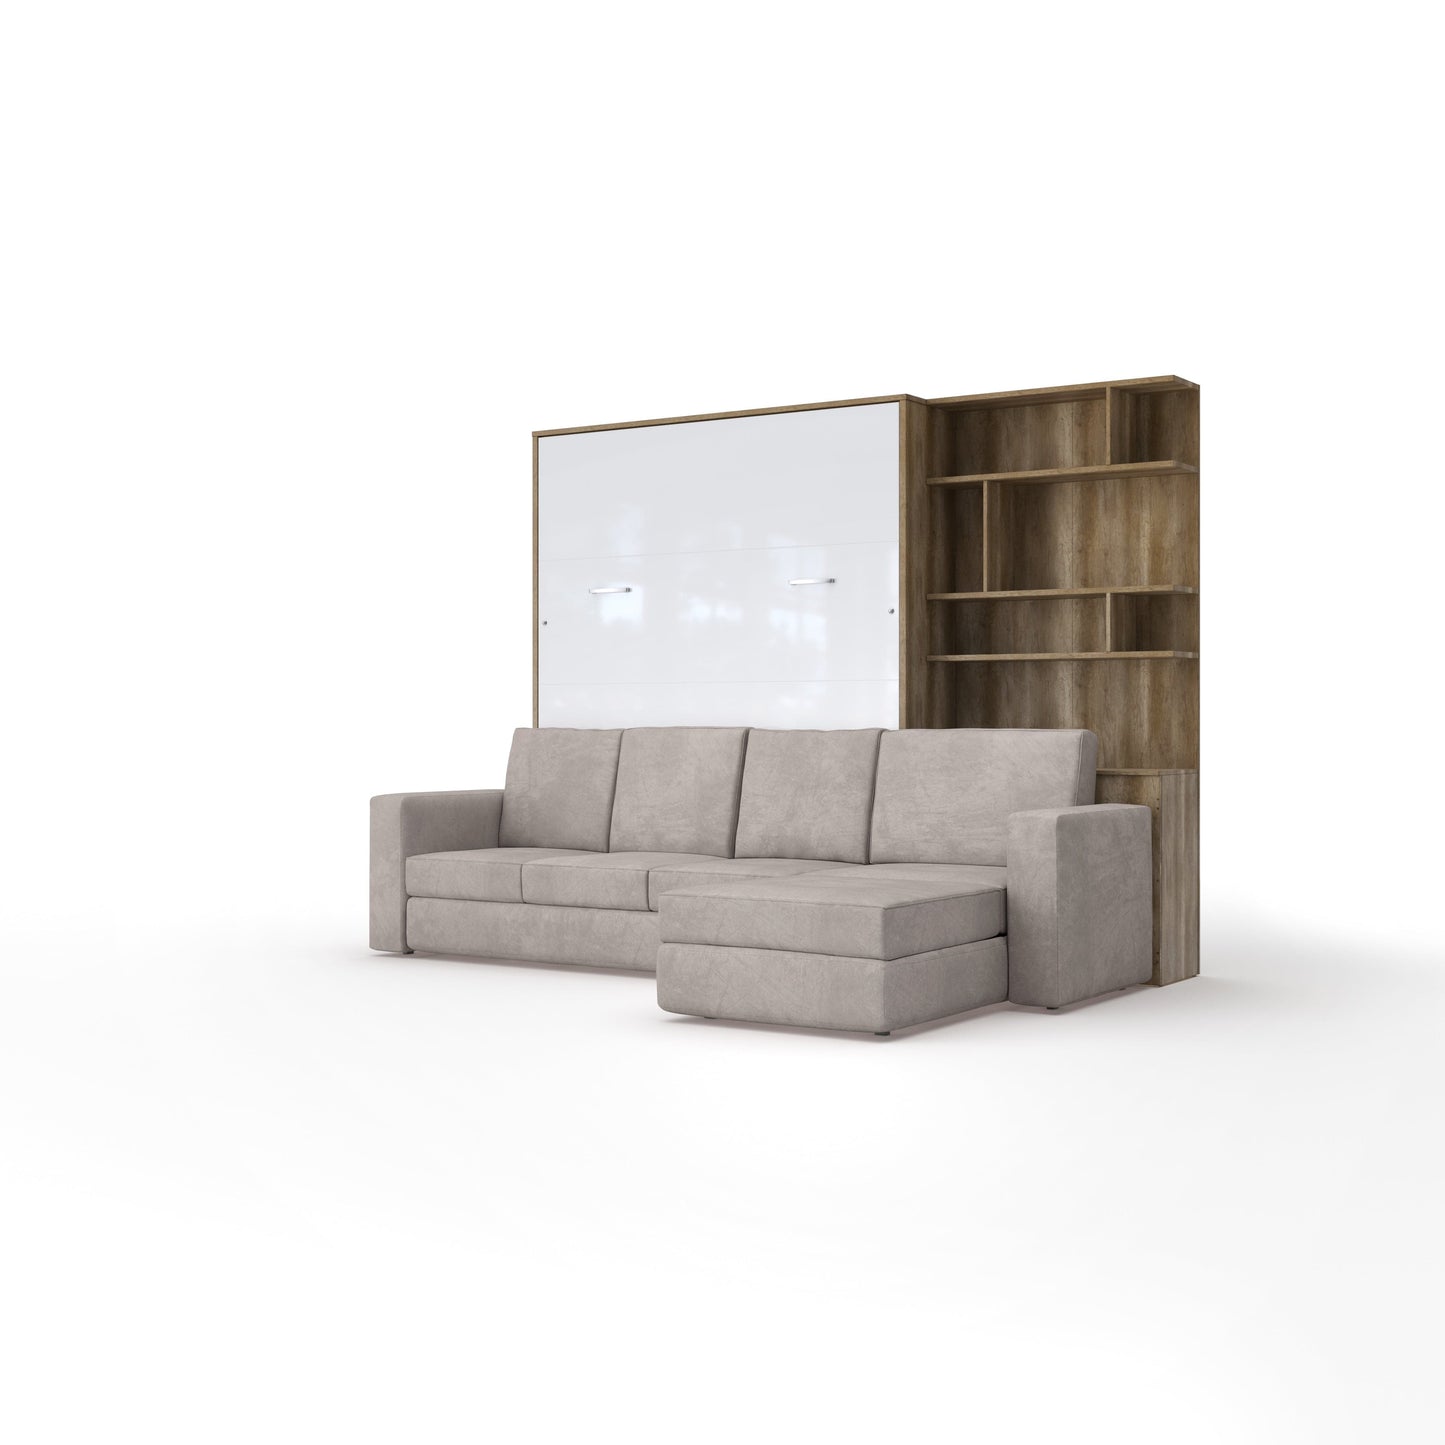 Murphy Bed European Queen size with a Sectional Sofa and a Bookcase, INVENTO. Sale